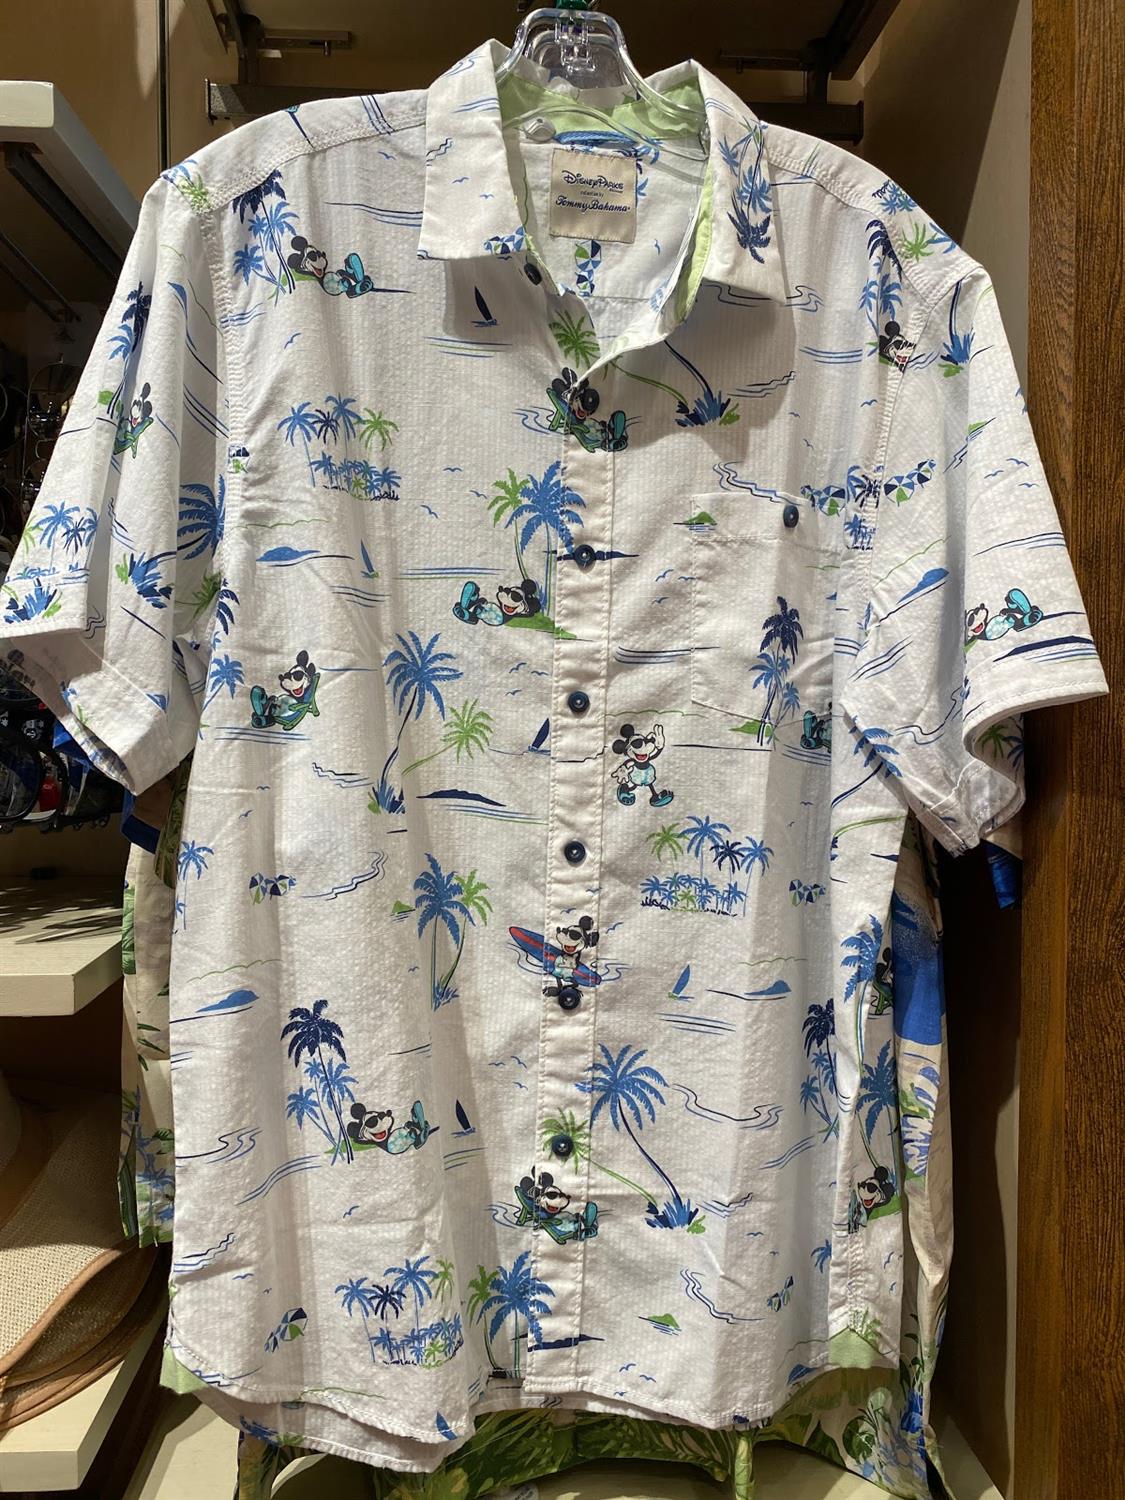 Photos - New Disney Tommy Bahama Collection Comes to Walt Disney World ...